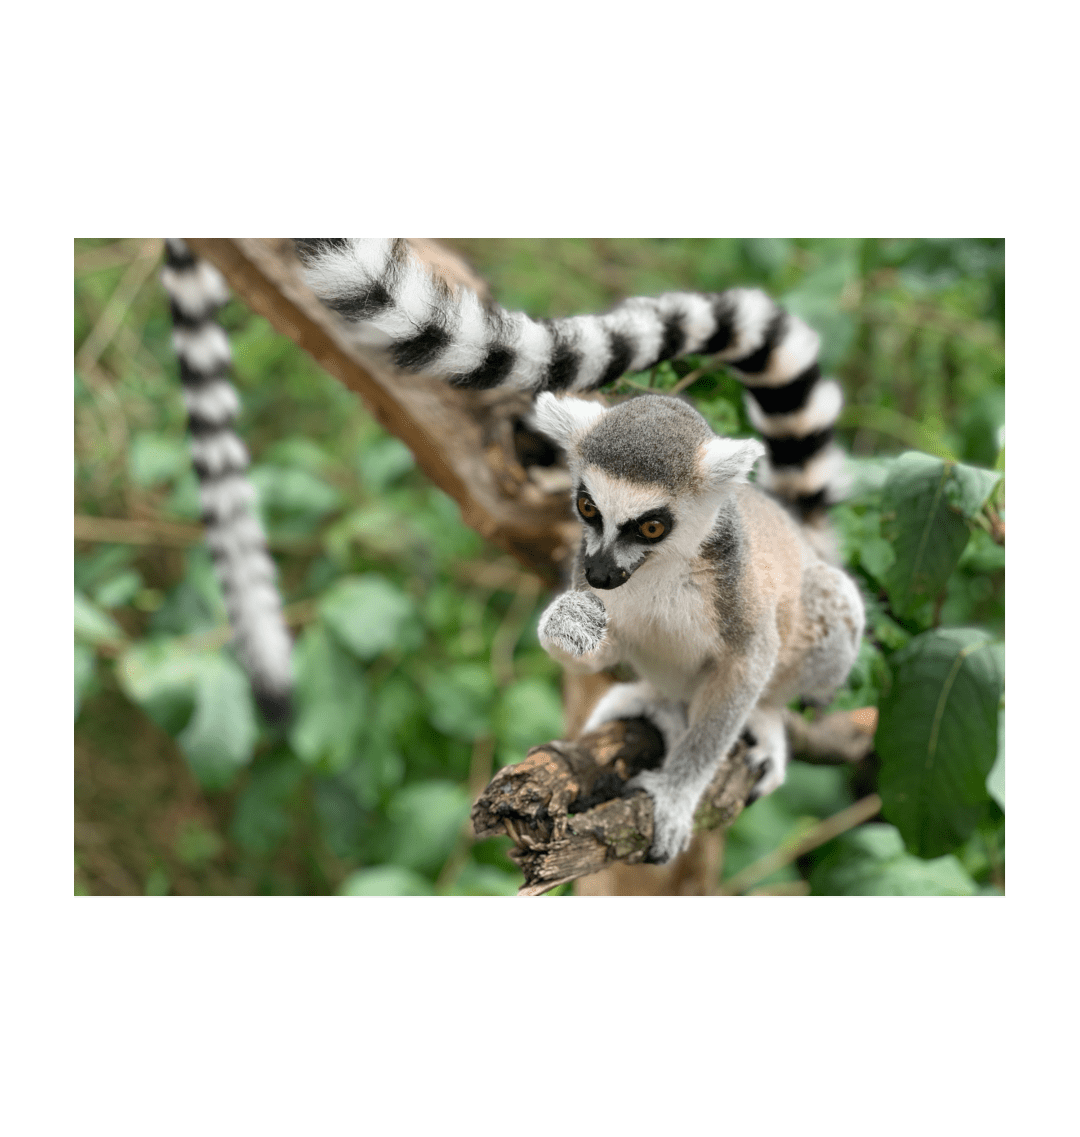 Why is King Julien important on Friday?